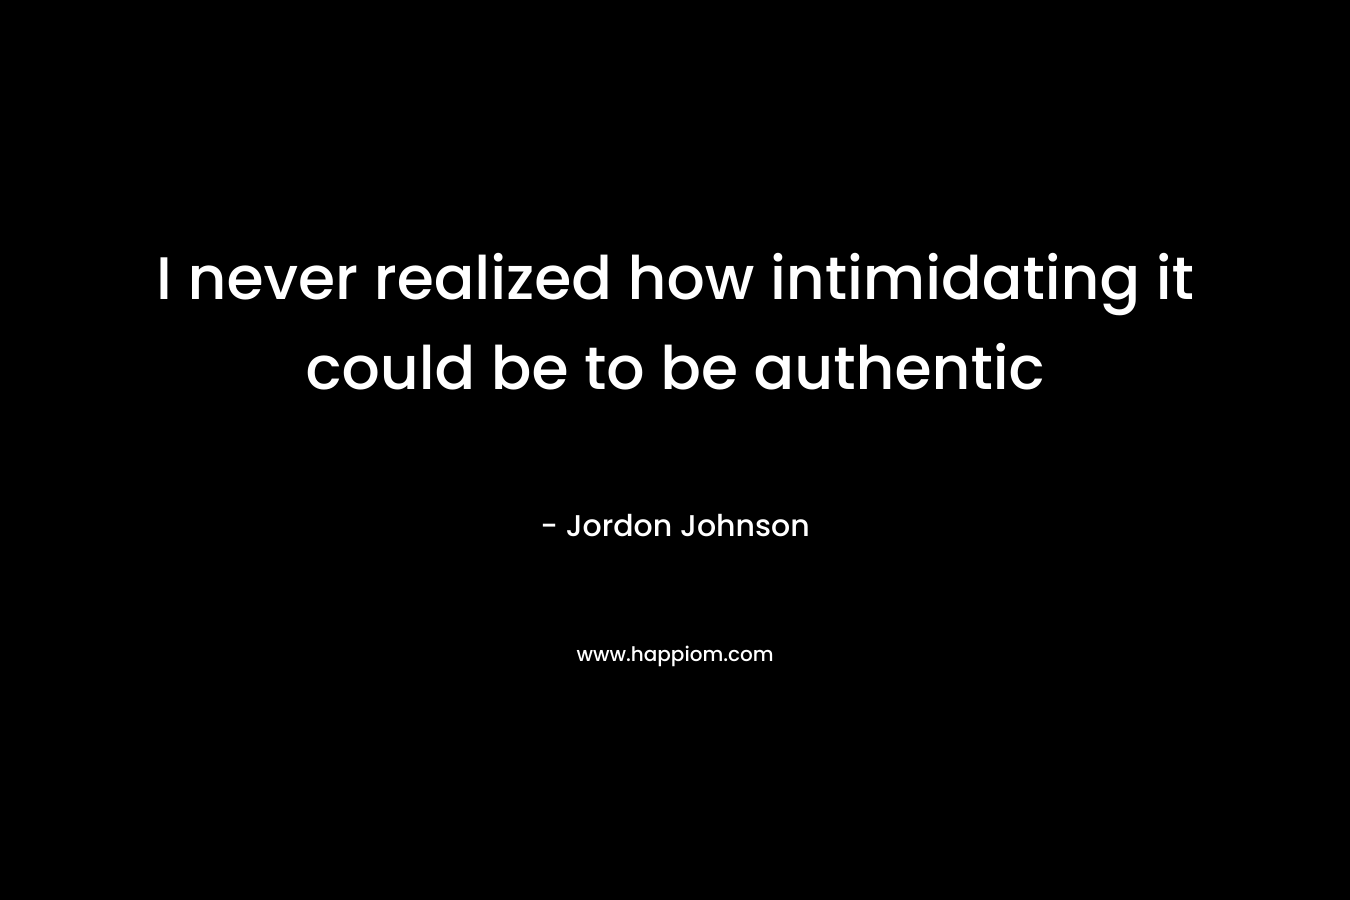 I never realized how intimidating it could be to be authentic